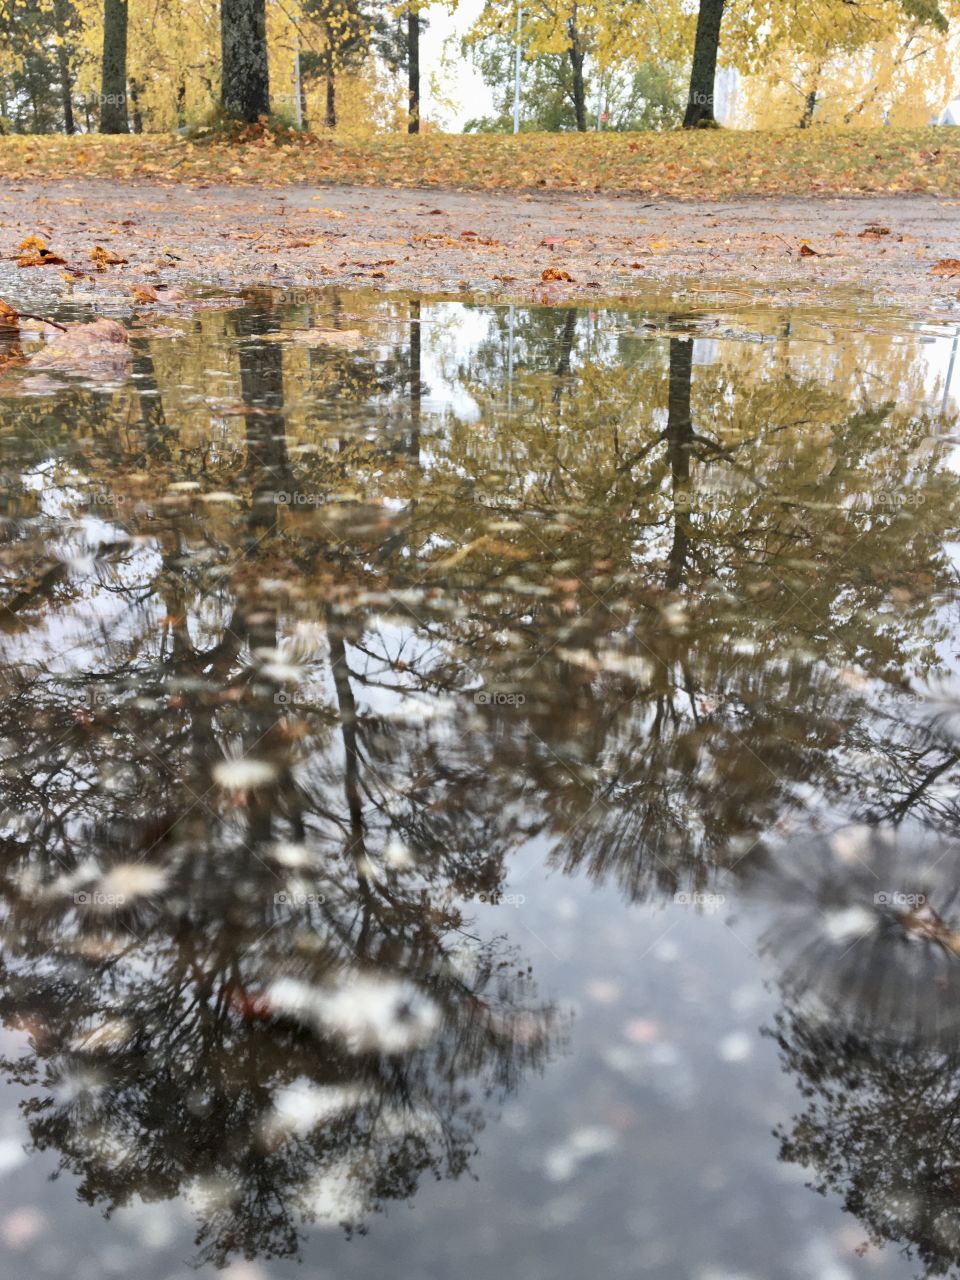 Reflection of the trees